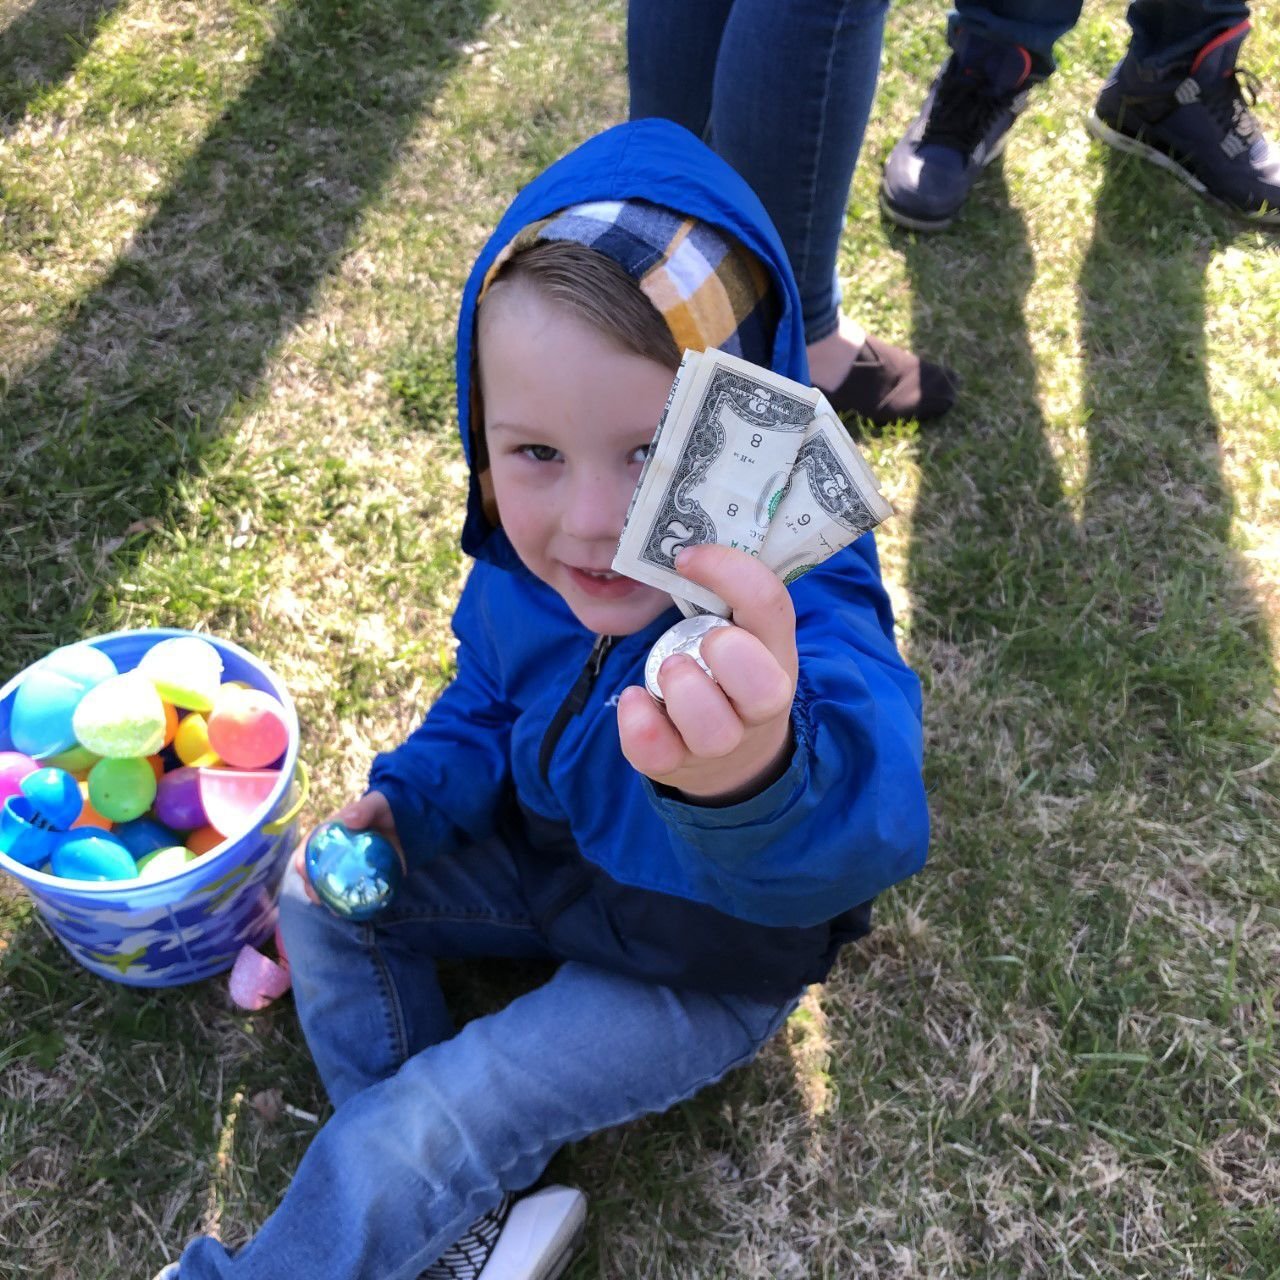 Children Happy To Find Candy And Cash At Easter Egg Hunt Local News Hannibal Net